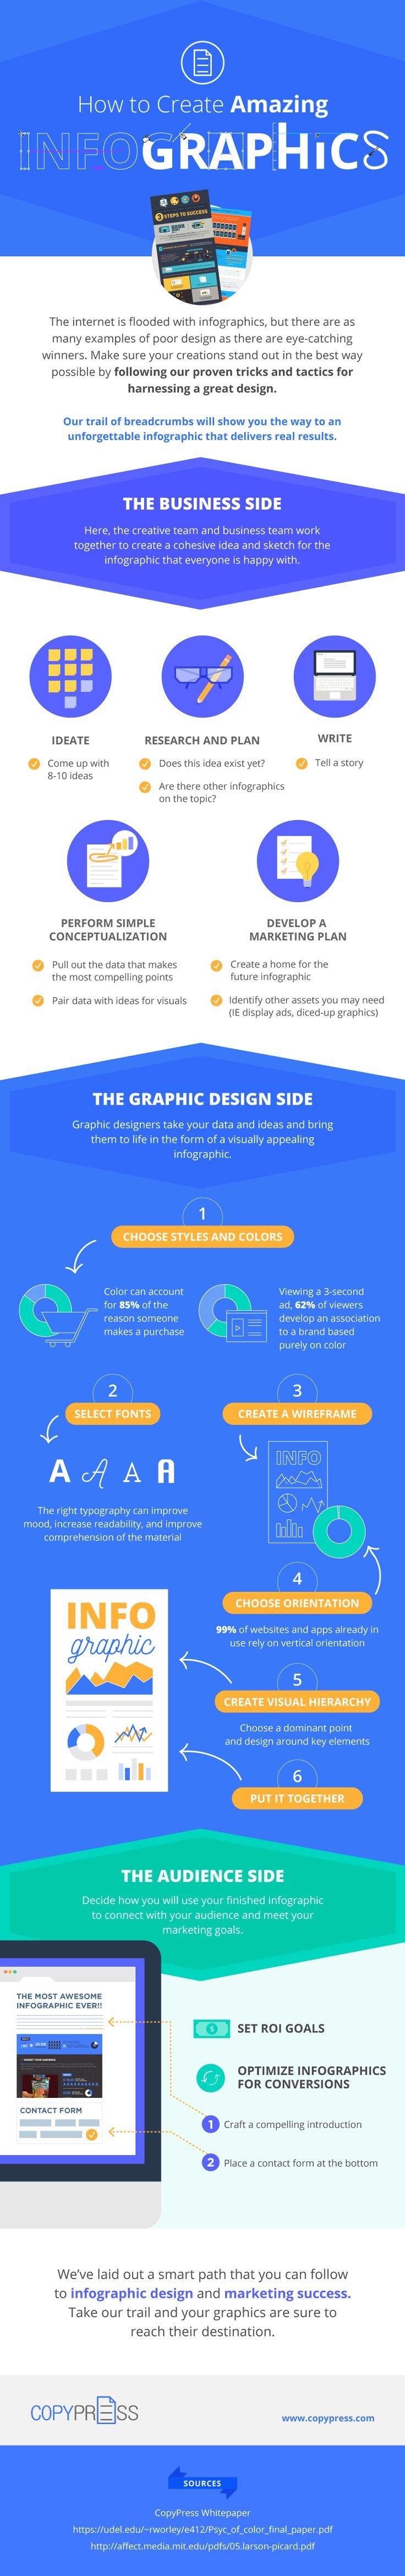 1531531070_31_Marketing-Infographic-Wondering-how-to-create-an-infographic-Does-it-seem-complex-and-intimidating-H Marketing Infographic : Wondering how to create an infographic? Does it seem complex and intimidating? H...